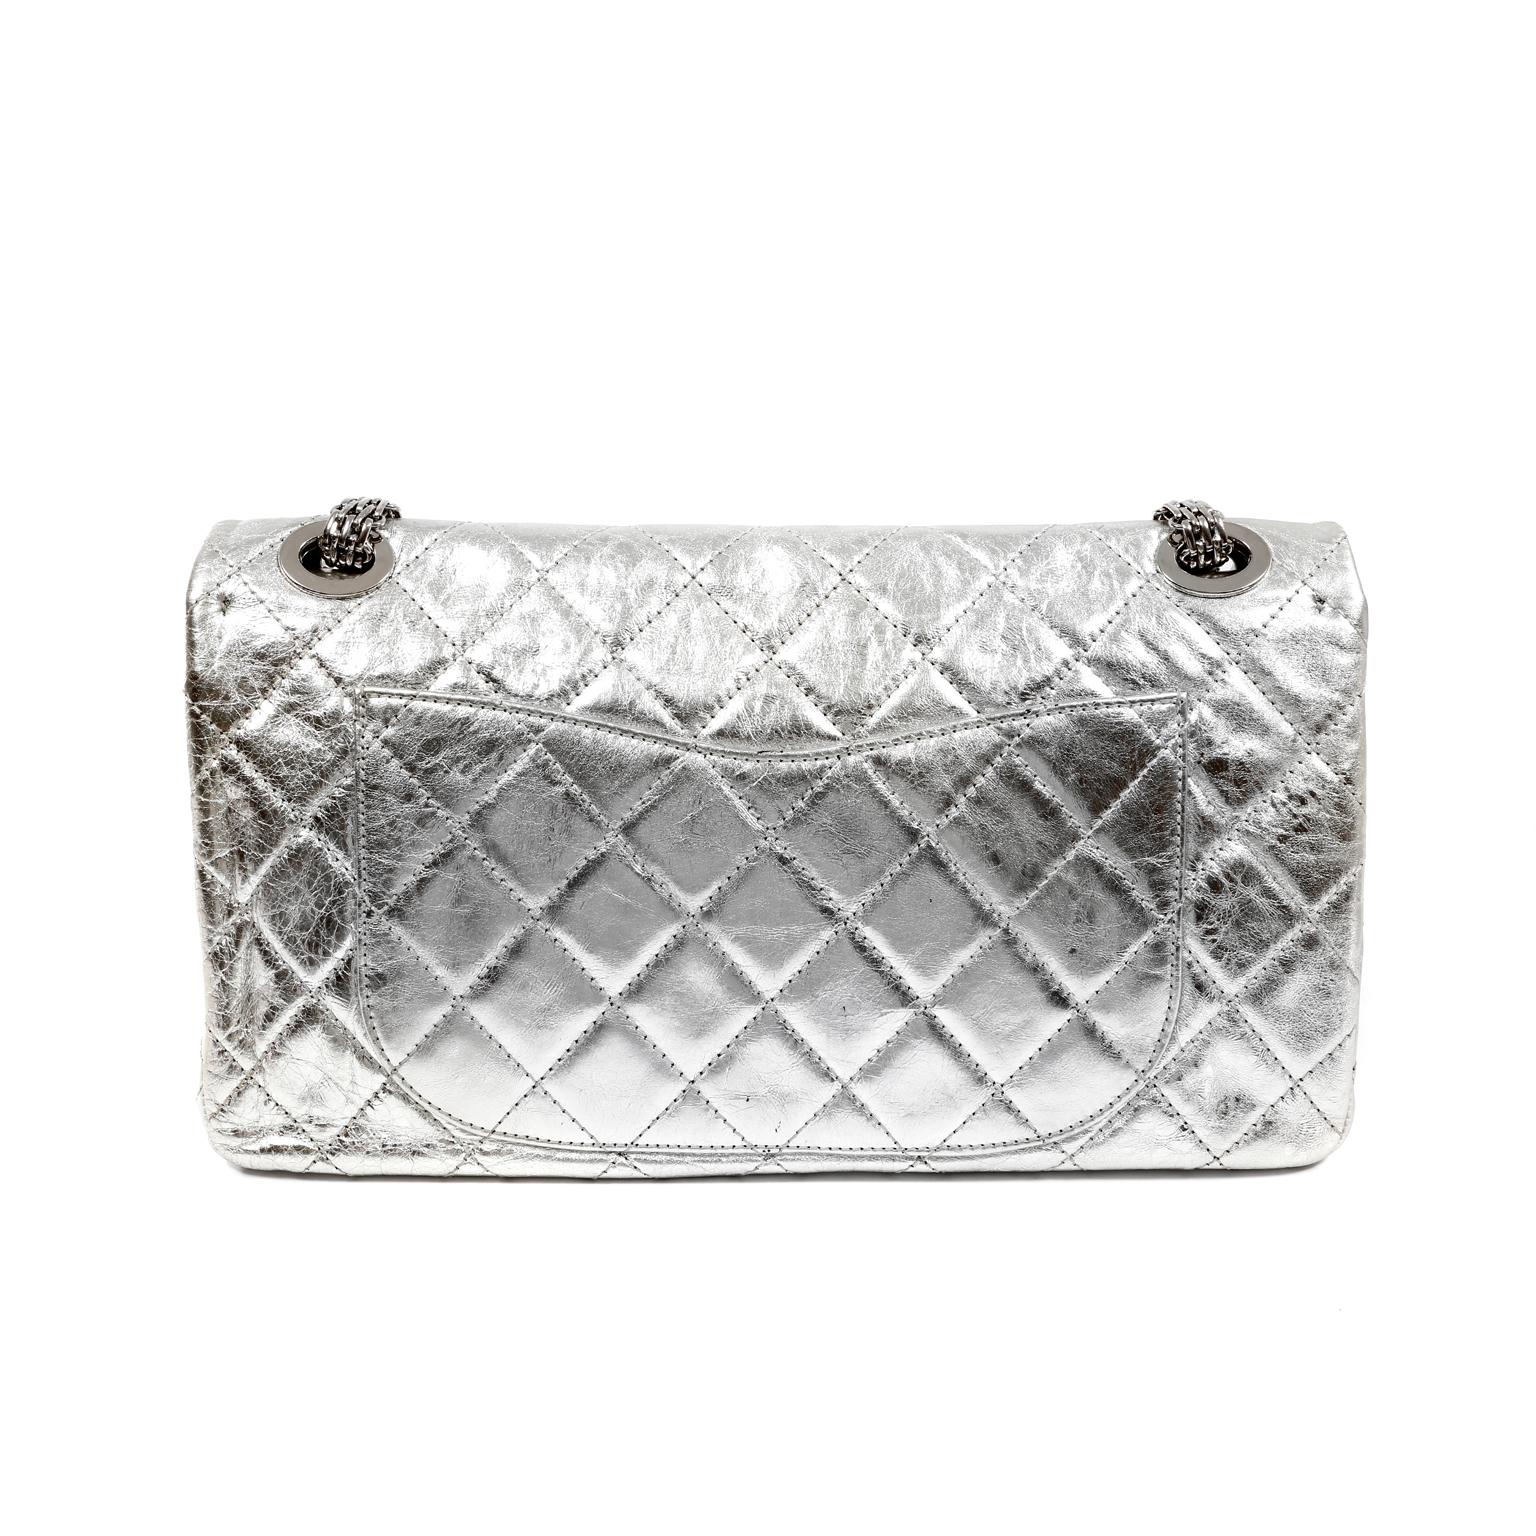 This authentic Chanel Metallic Silver 2.55 Reissue Flap Bag is in excellent condition.  The largest silhouette in the reissue, the 228 size is spacious without being overwhelming.
Intentionally distressed metallic silver calfskin is further quilted